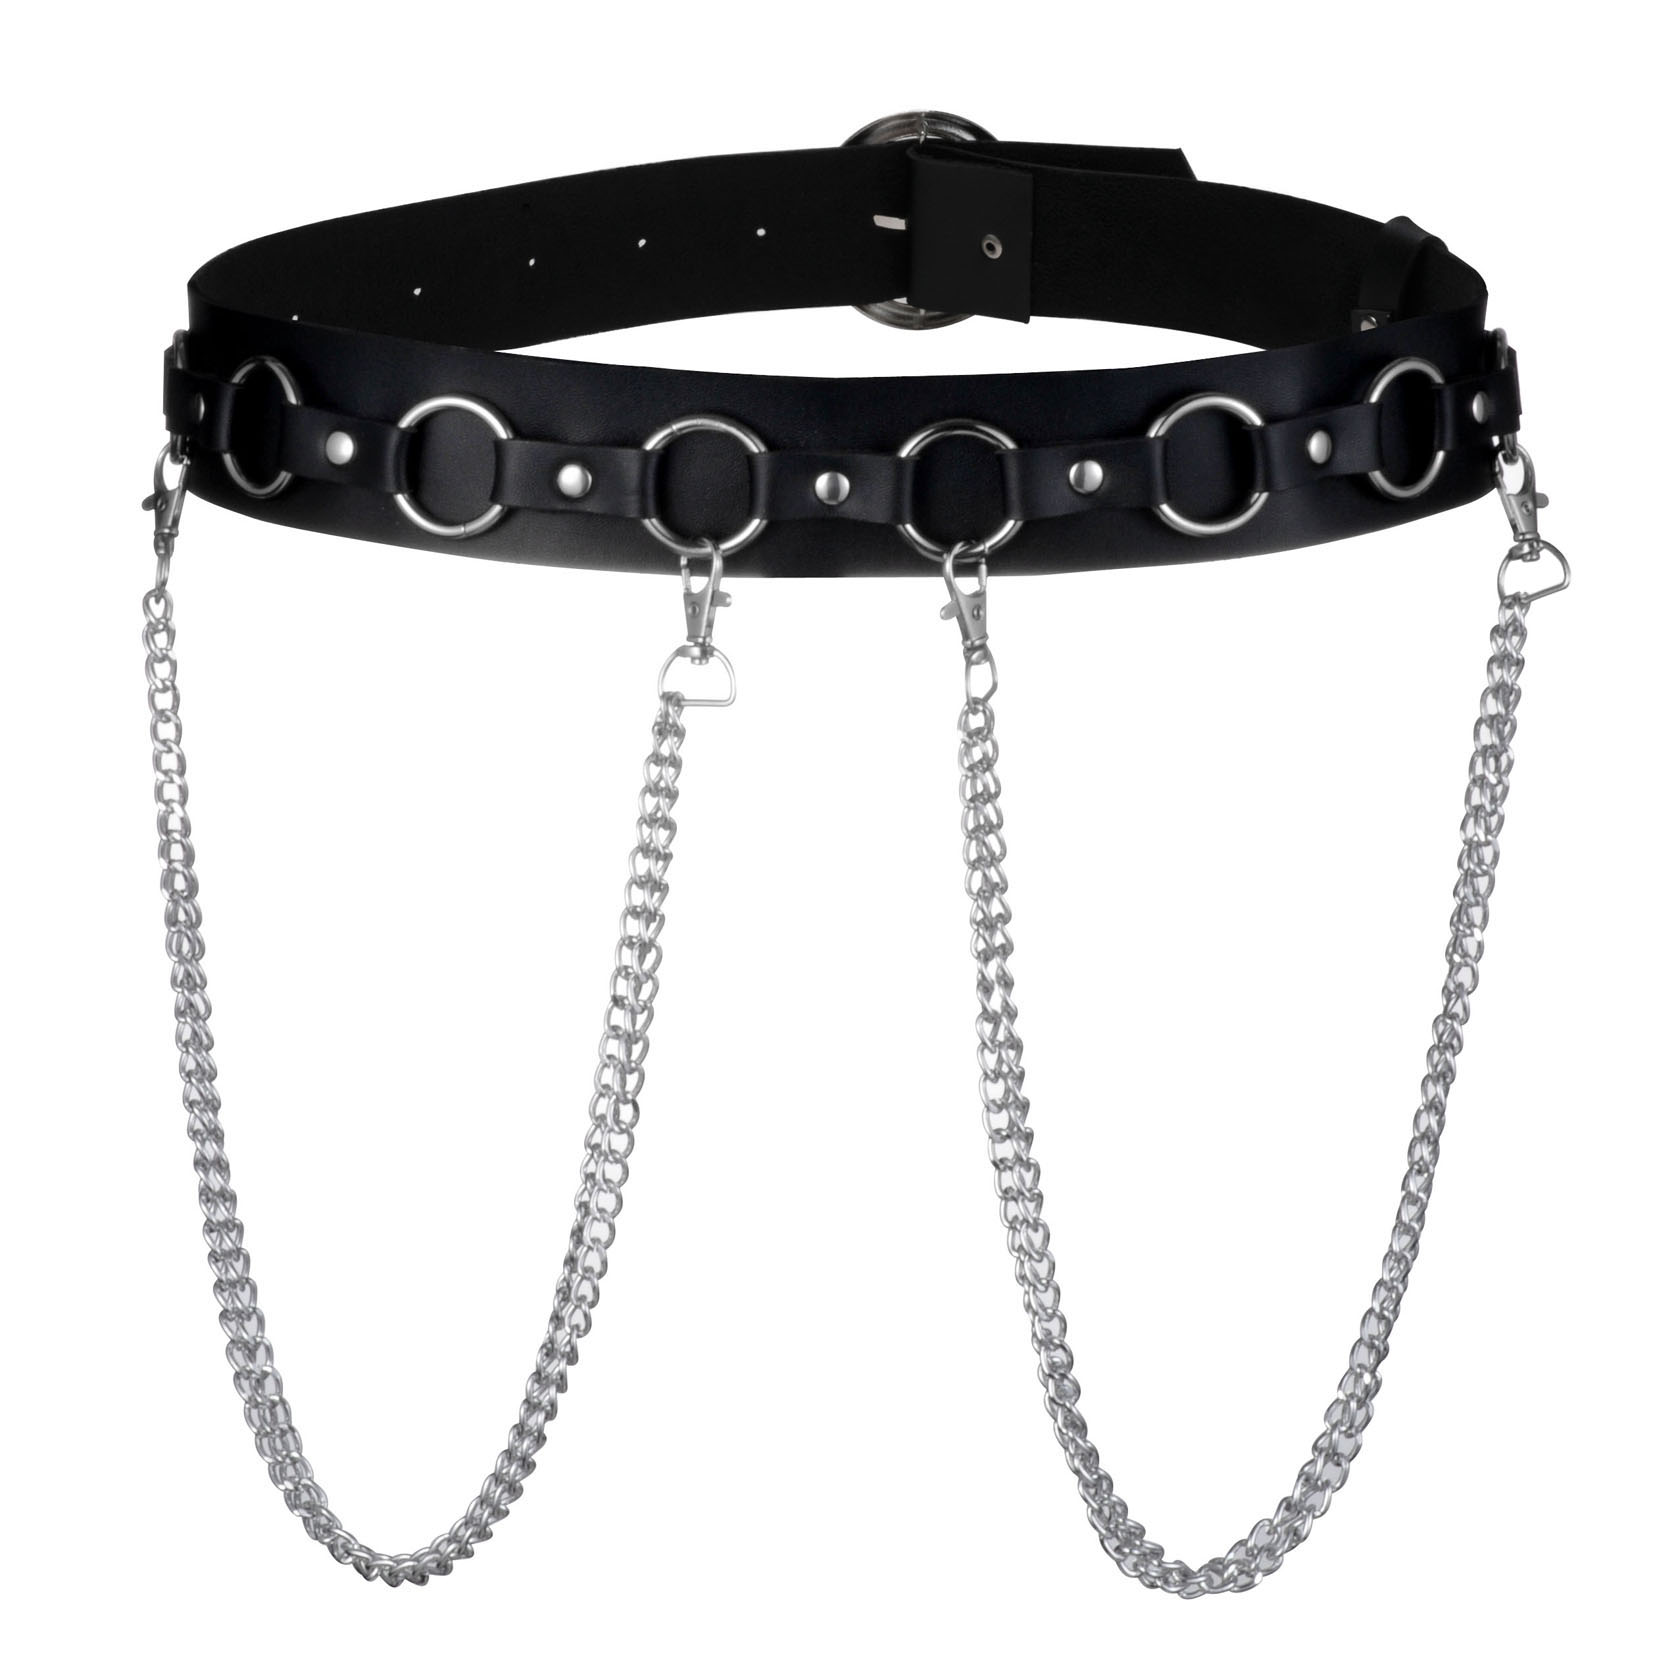 Punk leather belly chains gothic waist chain layered heart ring belt body jewelry accessories